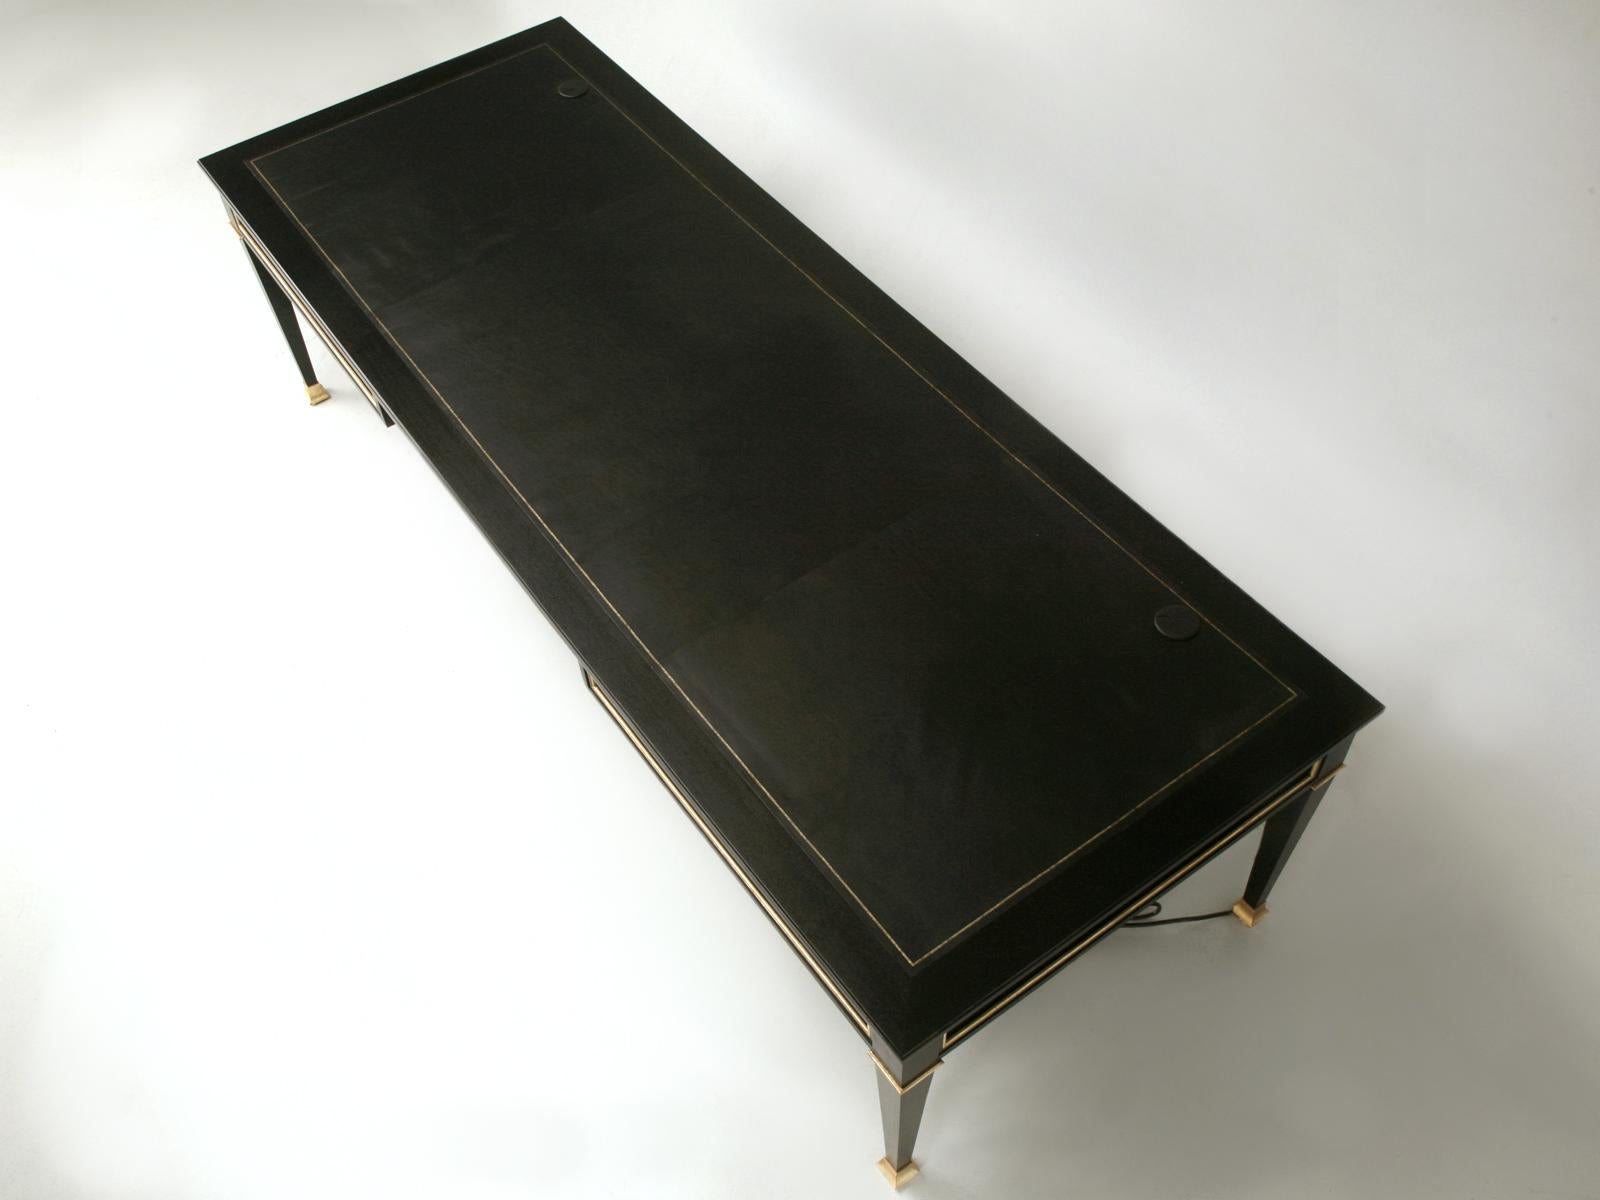 Maison Jansen inspired French Louis XVI style ebonized mahogany desk, with gold or brass accents, made here at Old Plank in our very own workshop. This impressive Maison Jansen Louis XVI inspired desk has an embossed and gilded leather top with 2